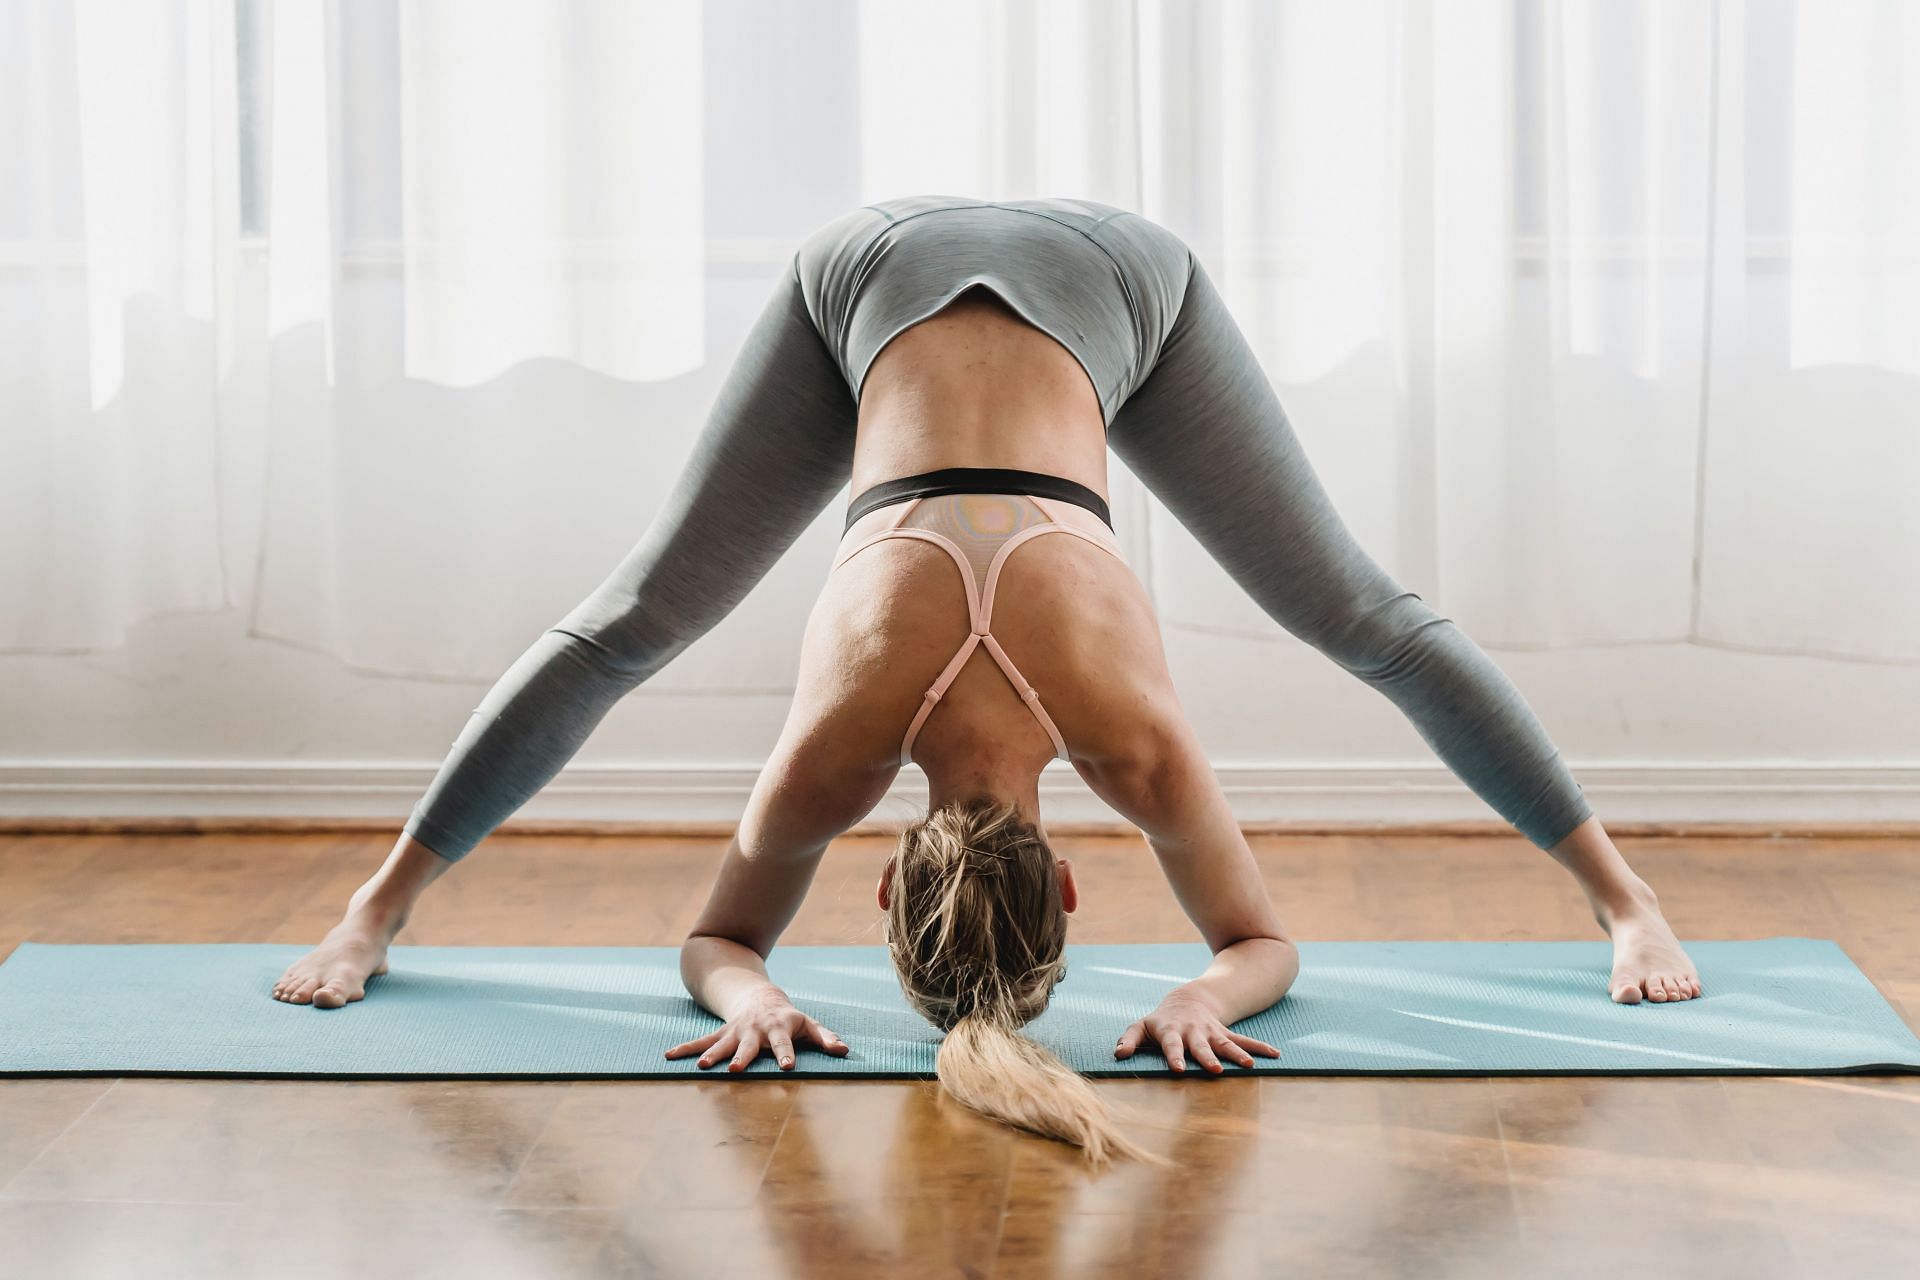 Certain yoga poses can help stretch the back muscles. (Image via Pexels/Marta Wave)